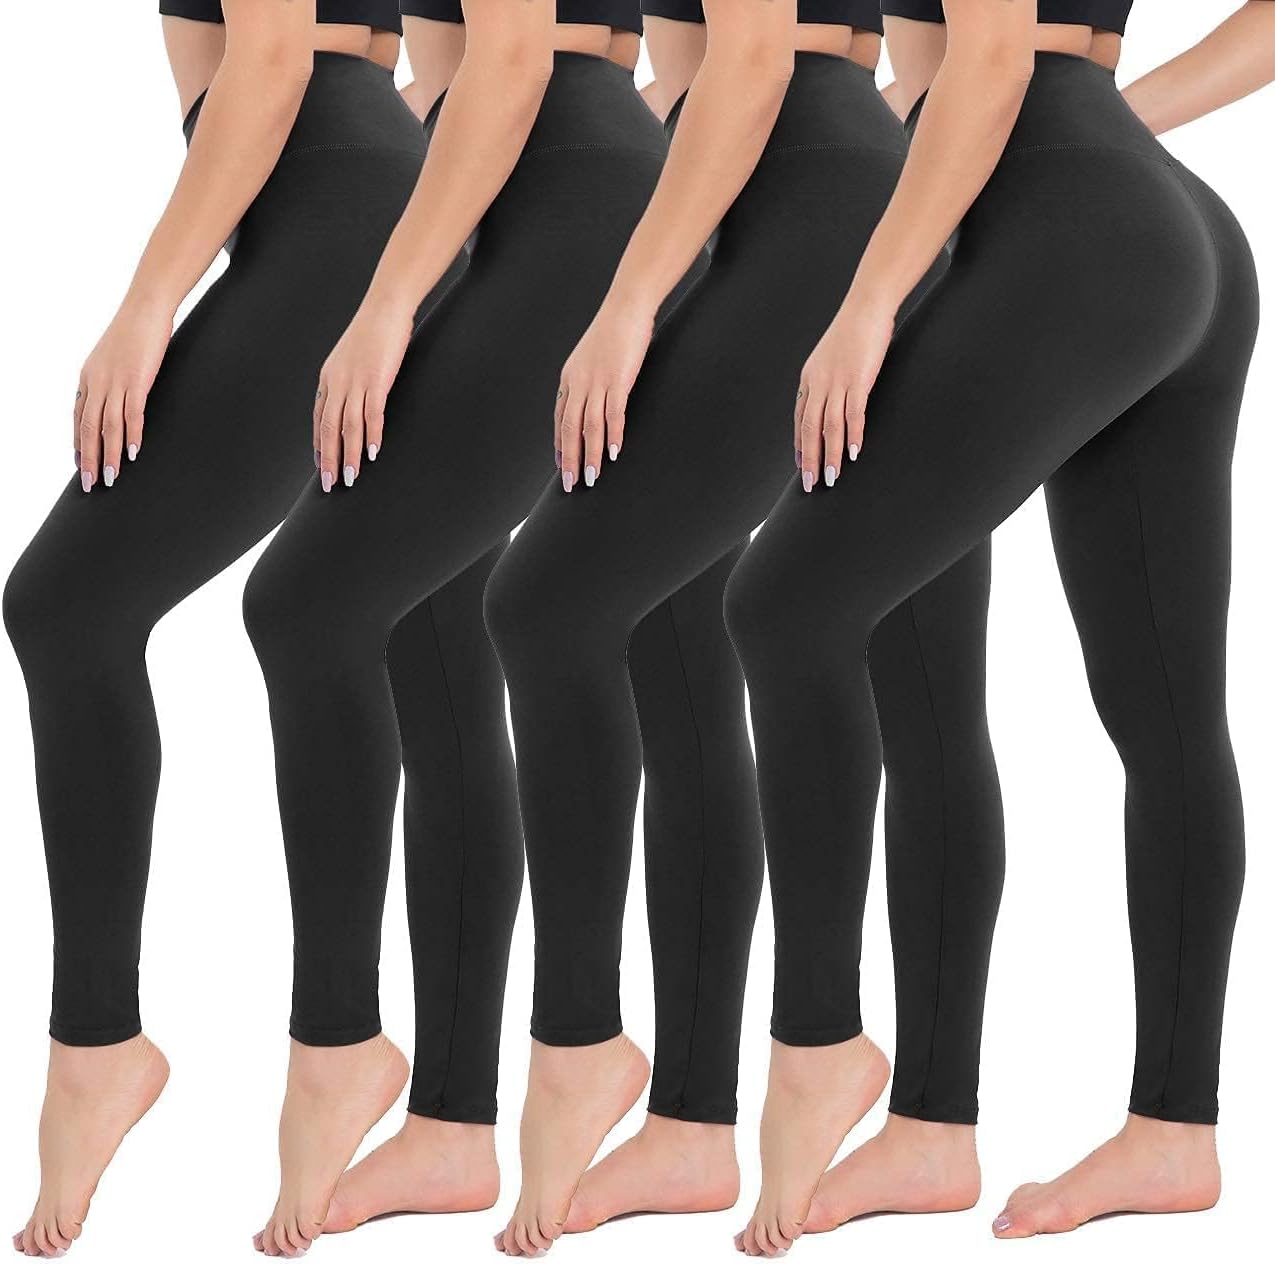 CAMPSNAIL 4 Pack High Waisted Leggings for Women - Soft Tummy Control Slimming Yoga Pants for Workout Running Reg Plus Size